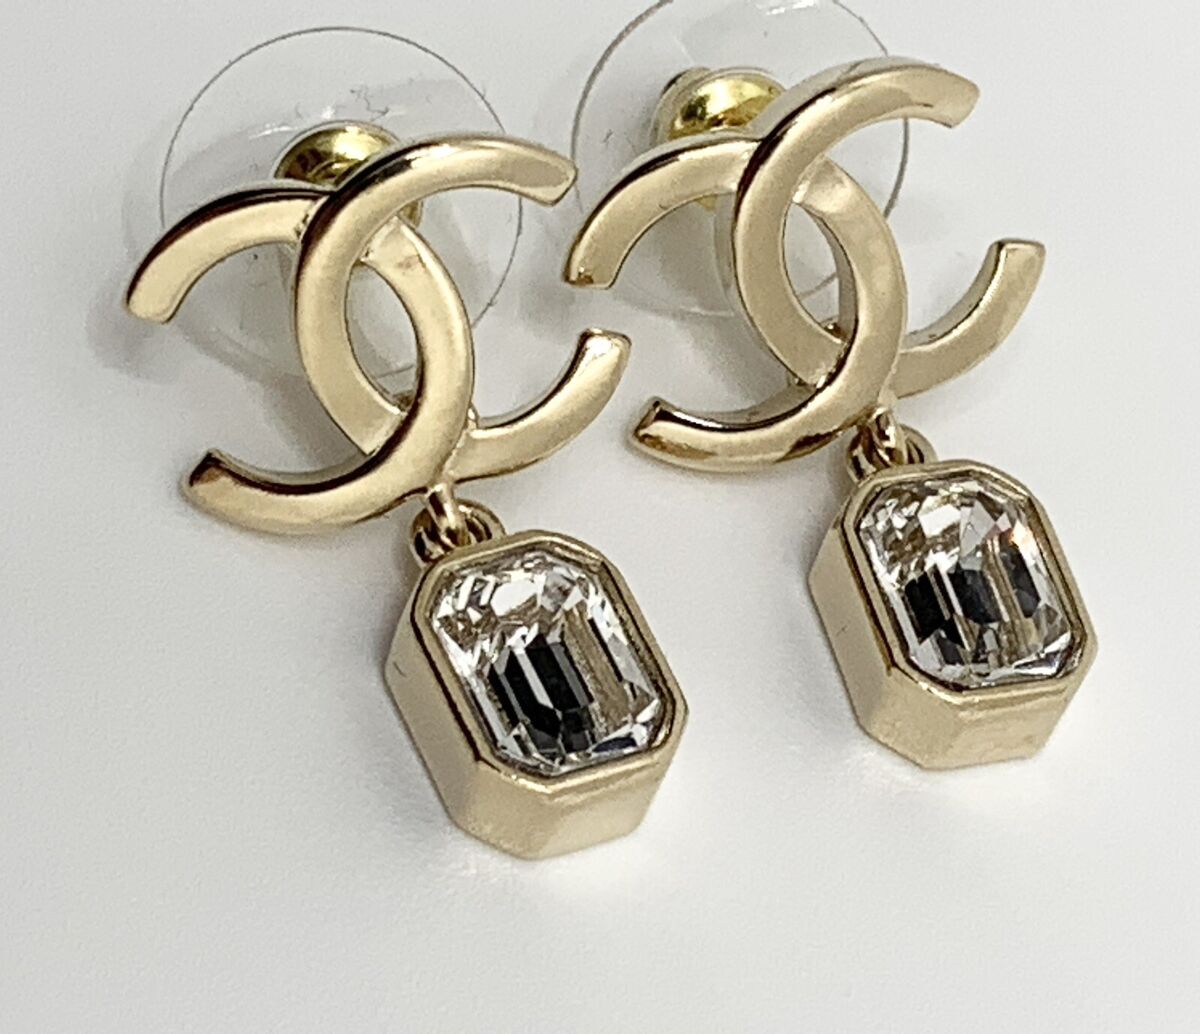 Authentic CHANEL CC gold earrings with dangling crystals